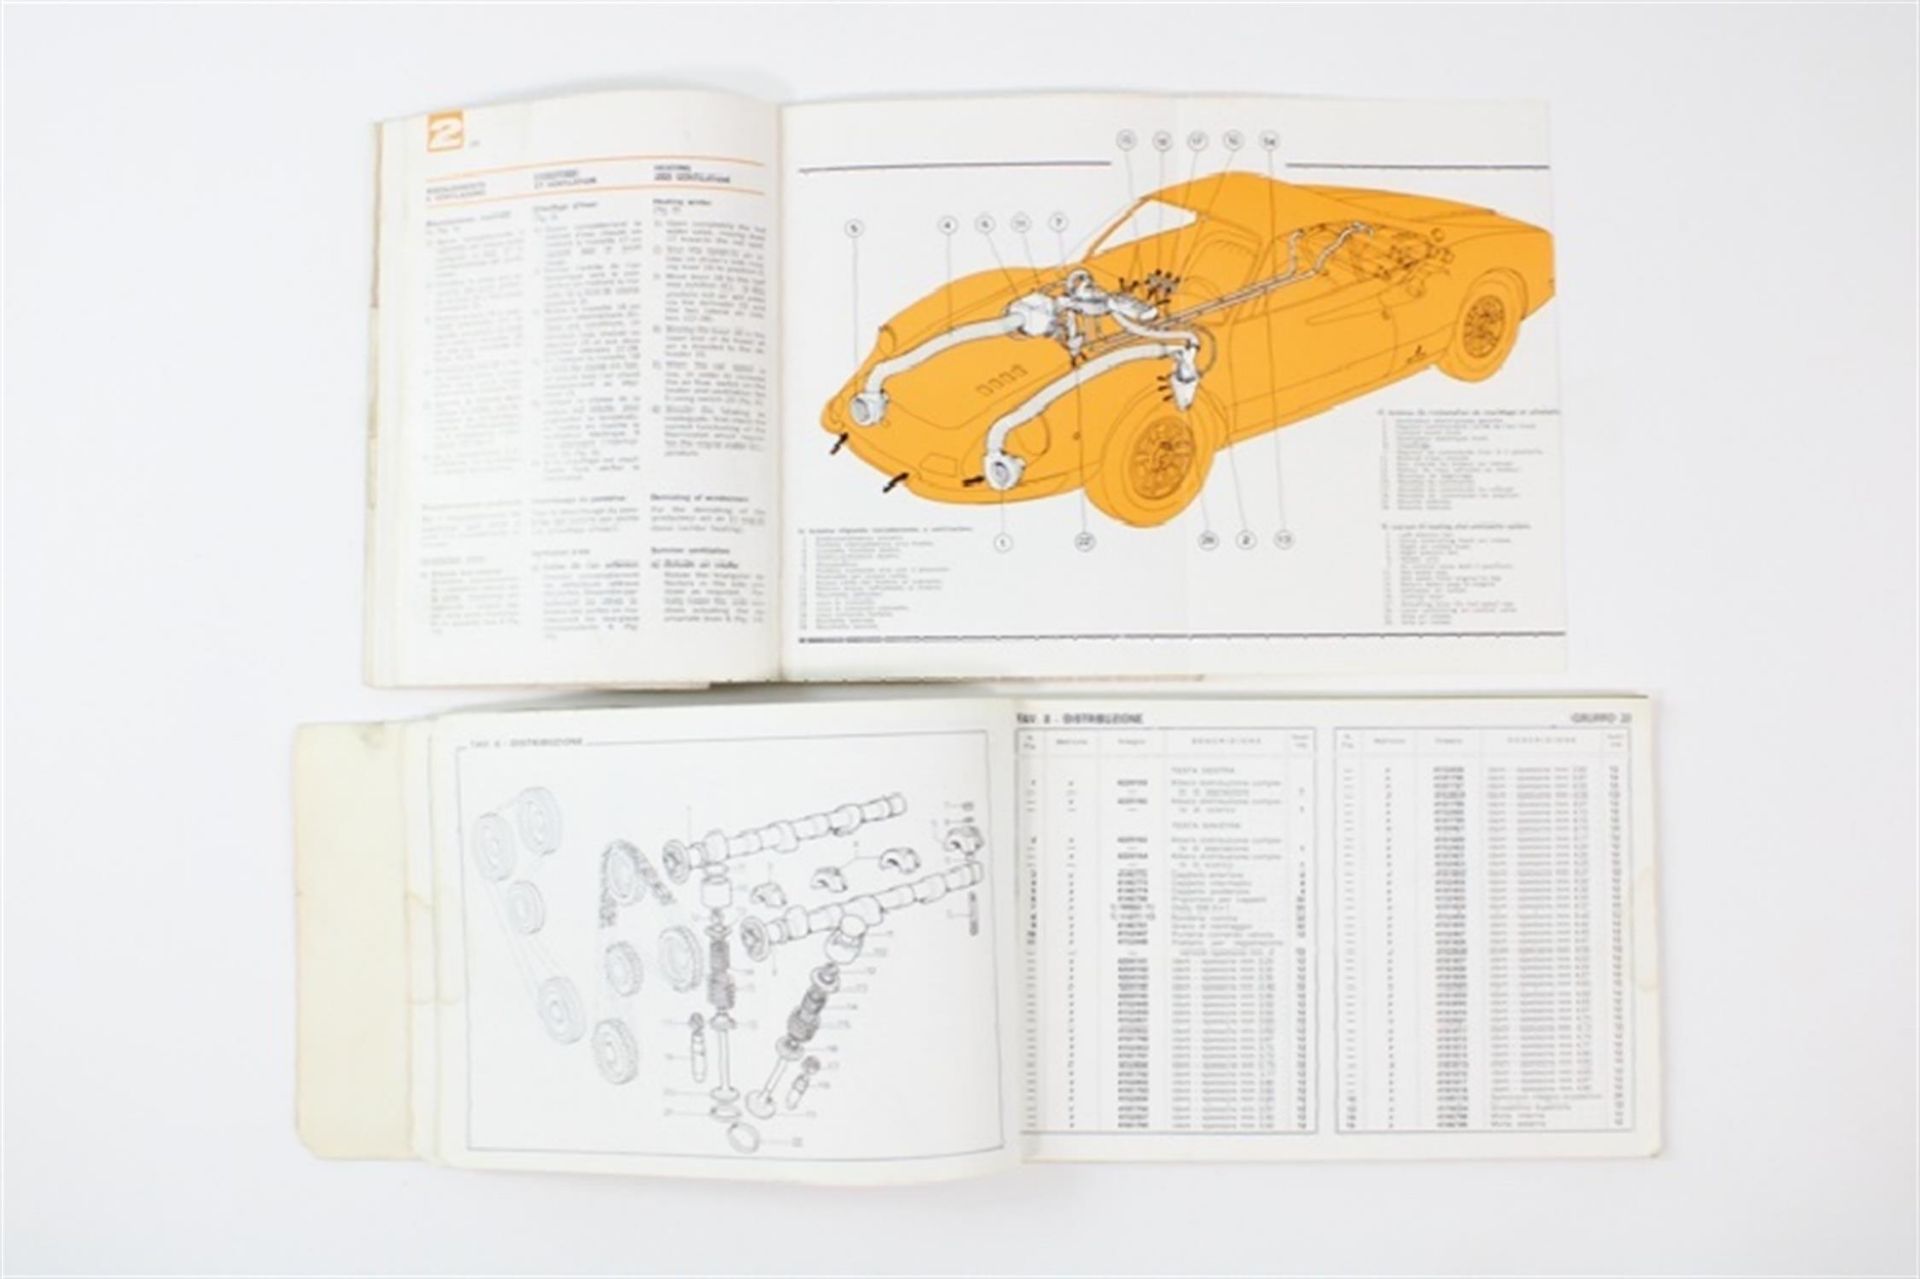 1971 Ferrari 246 Dino Complete Pouch and Manual Set - Image 8 of 10